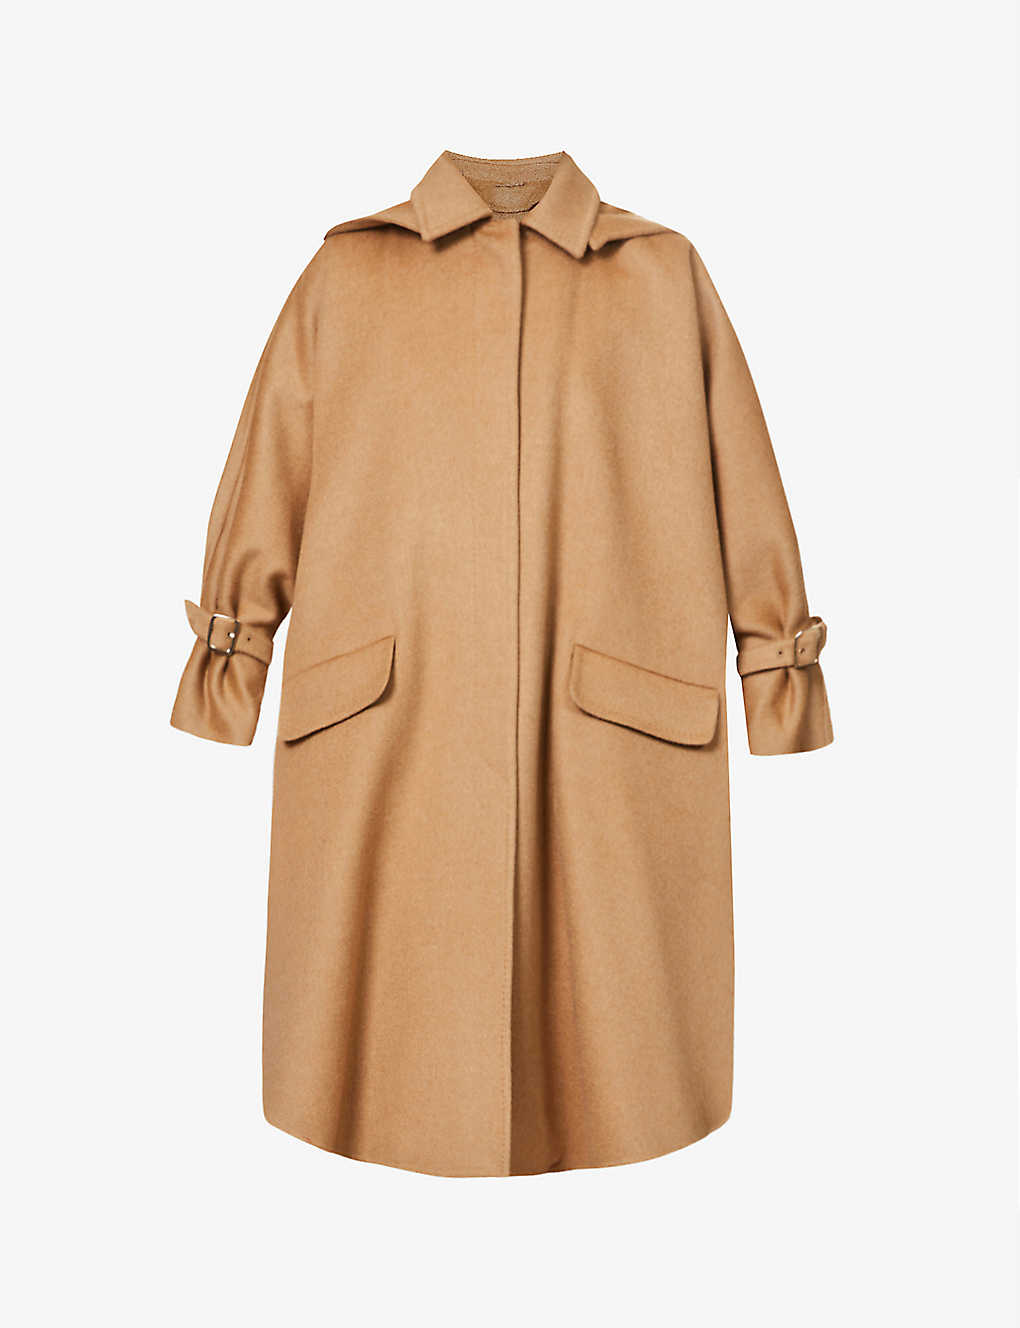 Lecce hooded camel-wool coat(9394225)